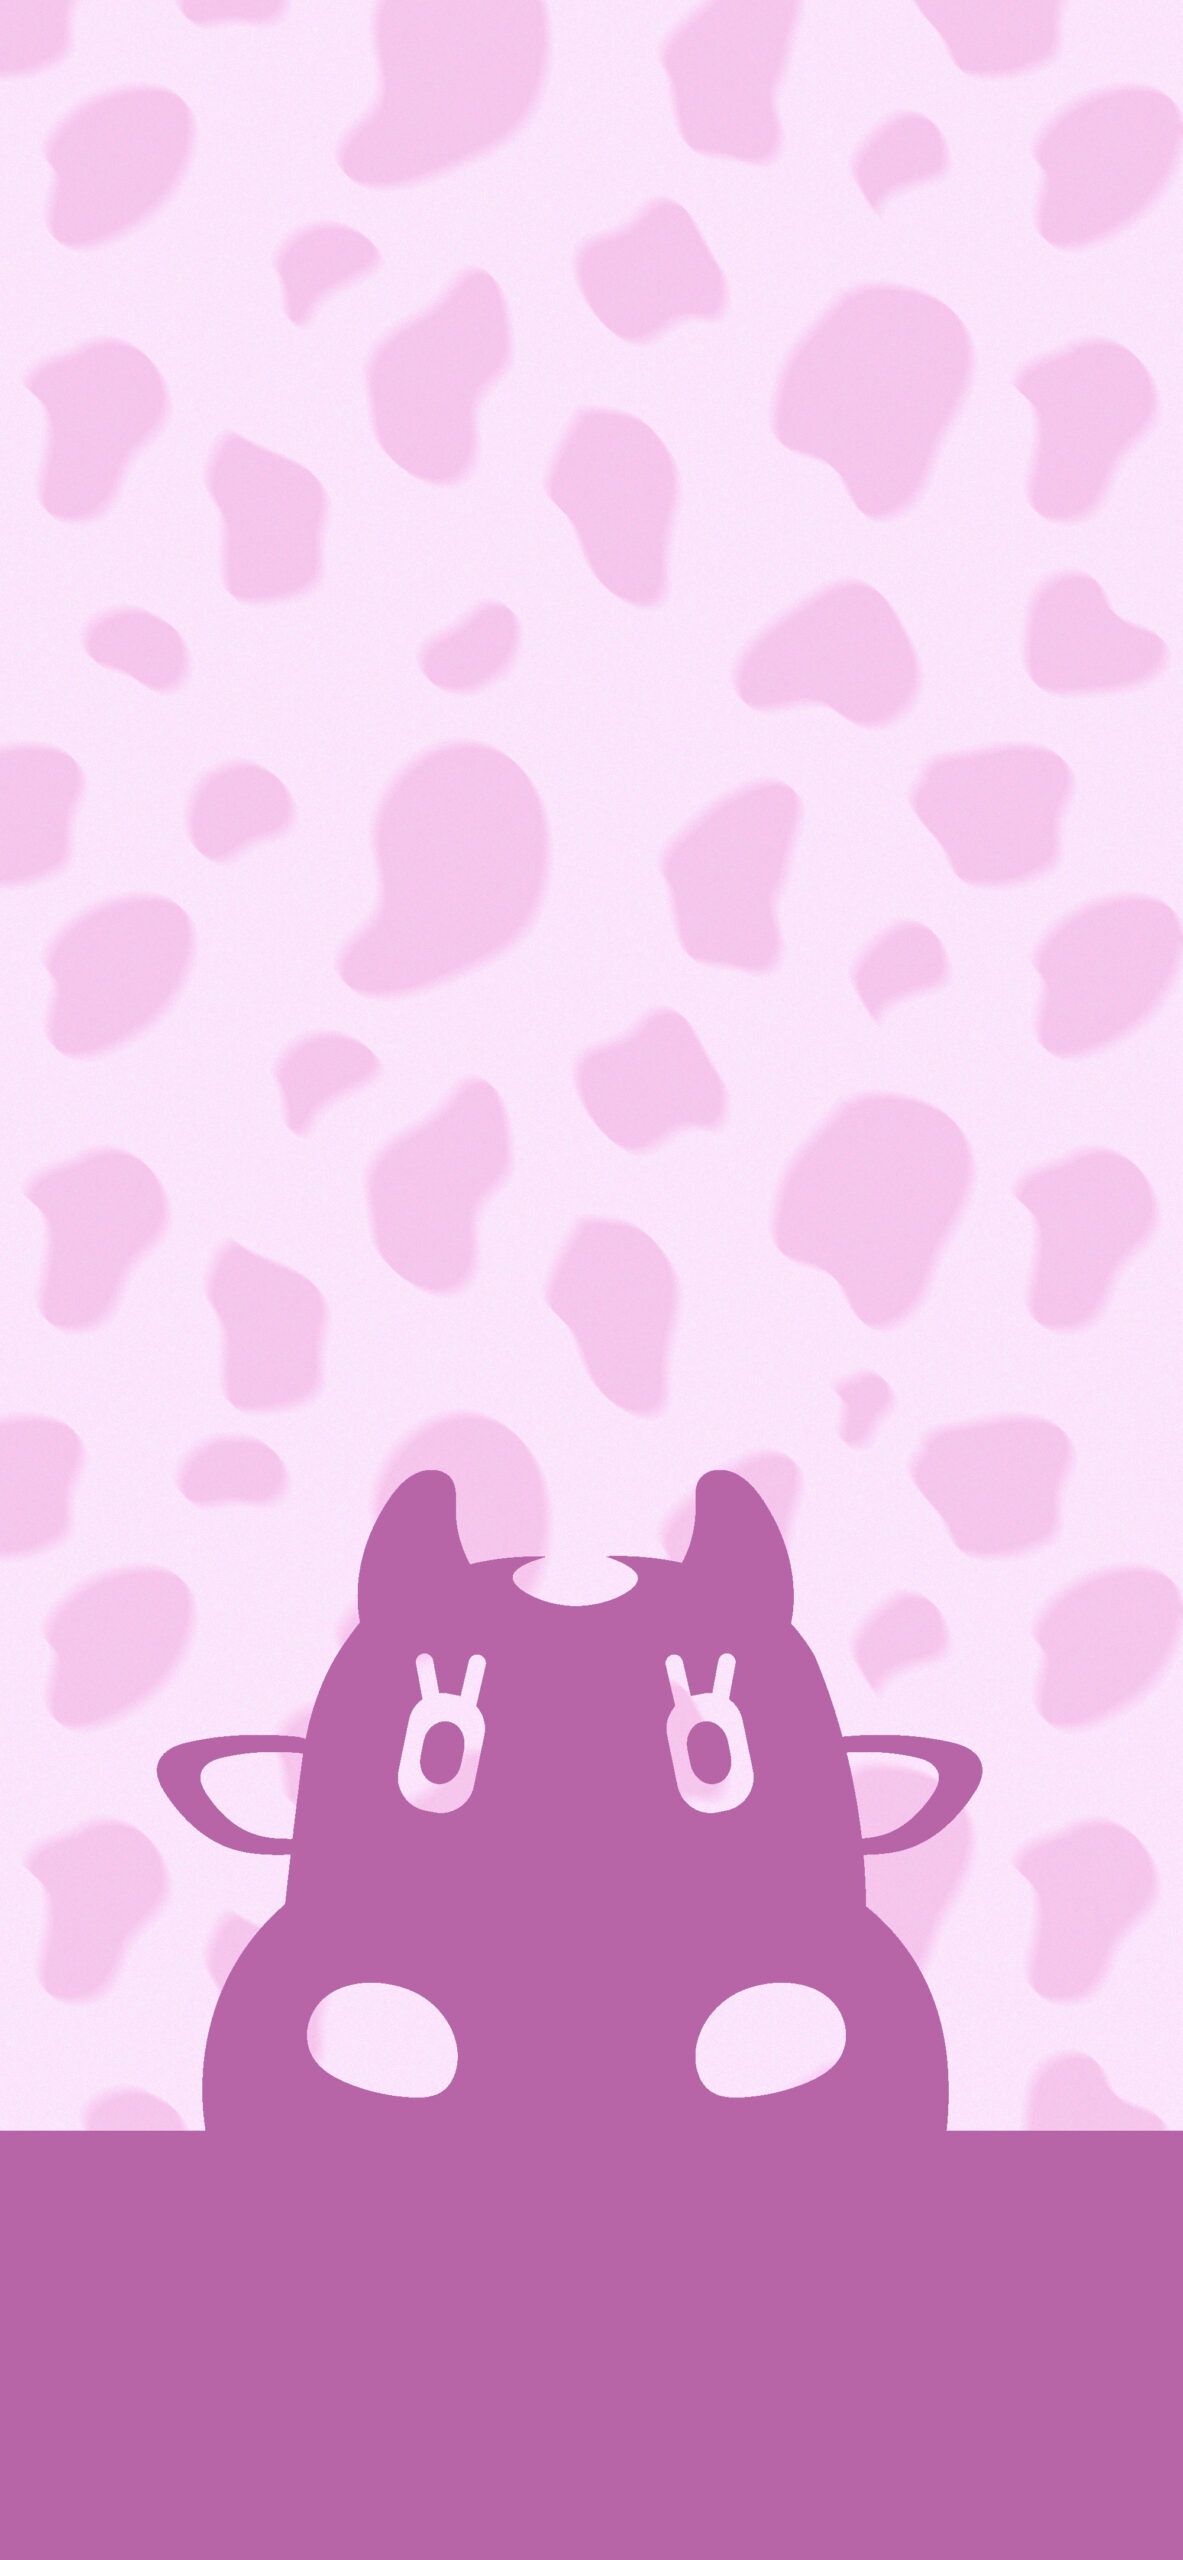 A purple cow with pink spots on it - Animal Crossing